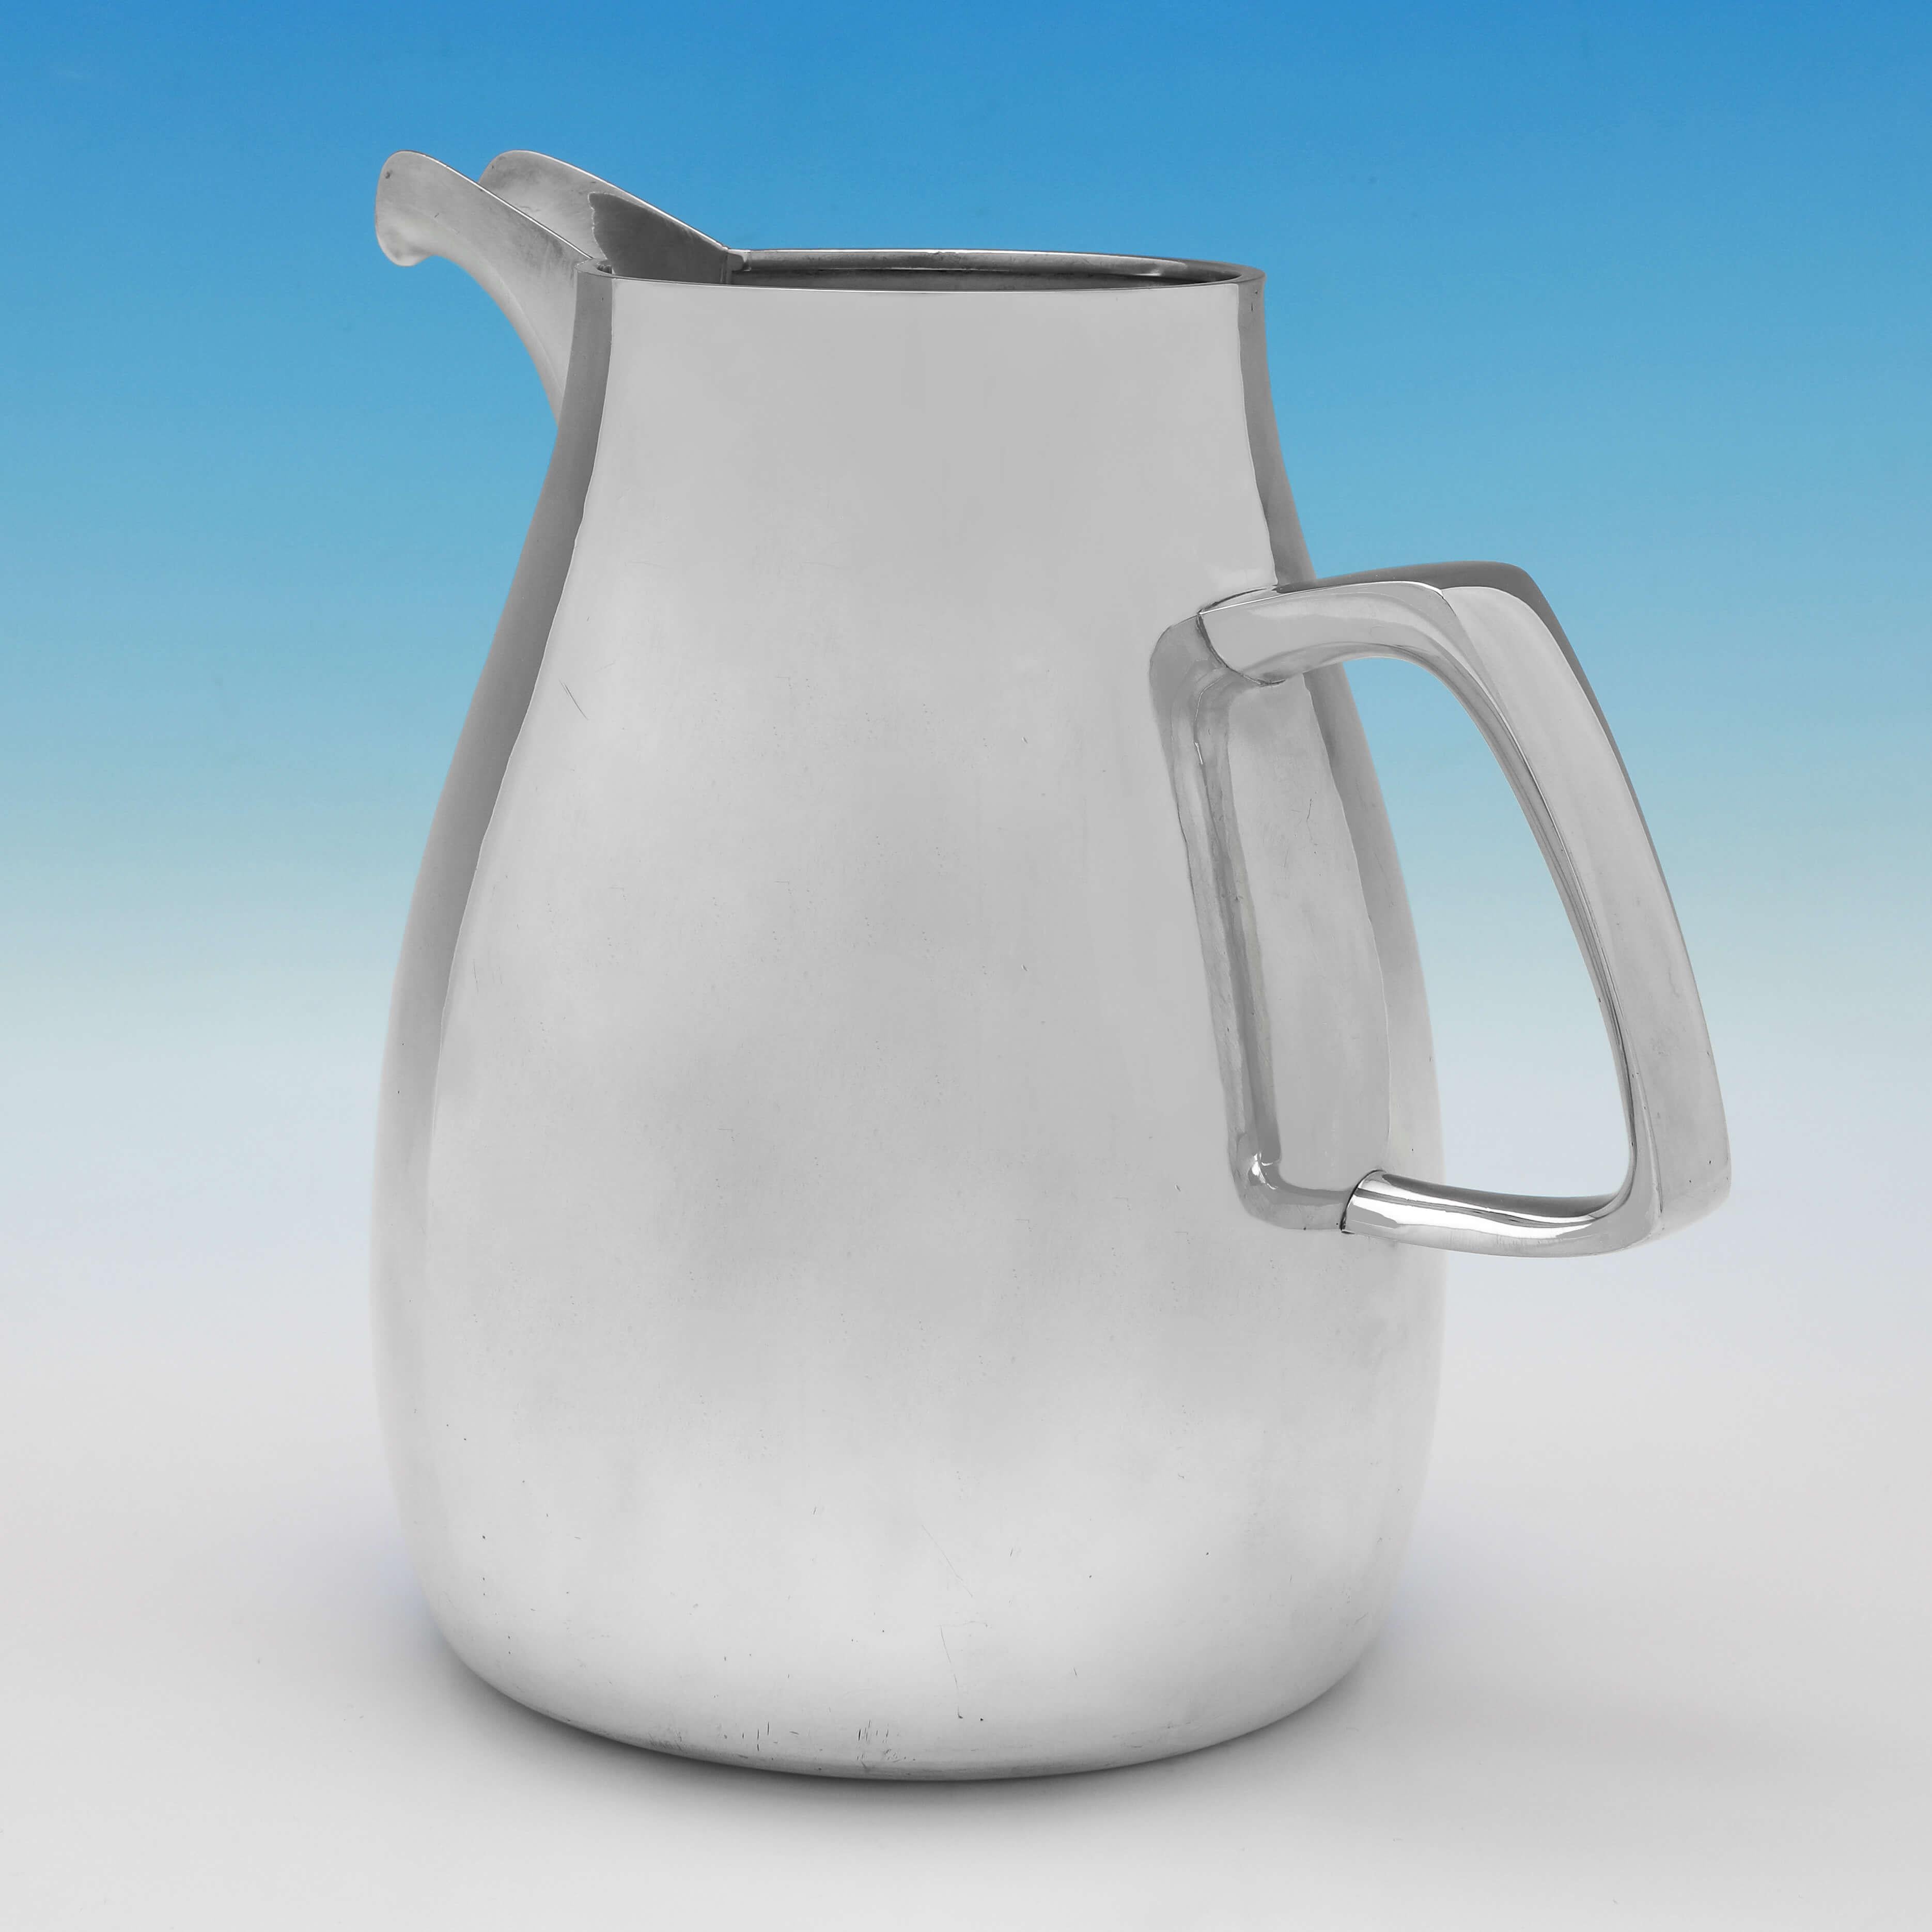 Hallmarked in London in 1965 by Gerald Benney, this handsome, Sterling Silver Beer Jug or Water Jug, is plain in style, with an angular handle. 

The jug measures 9